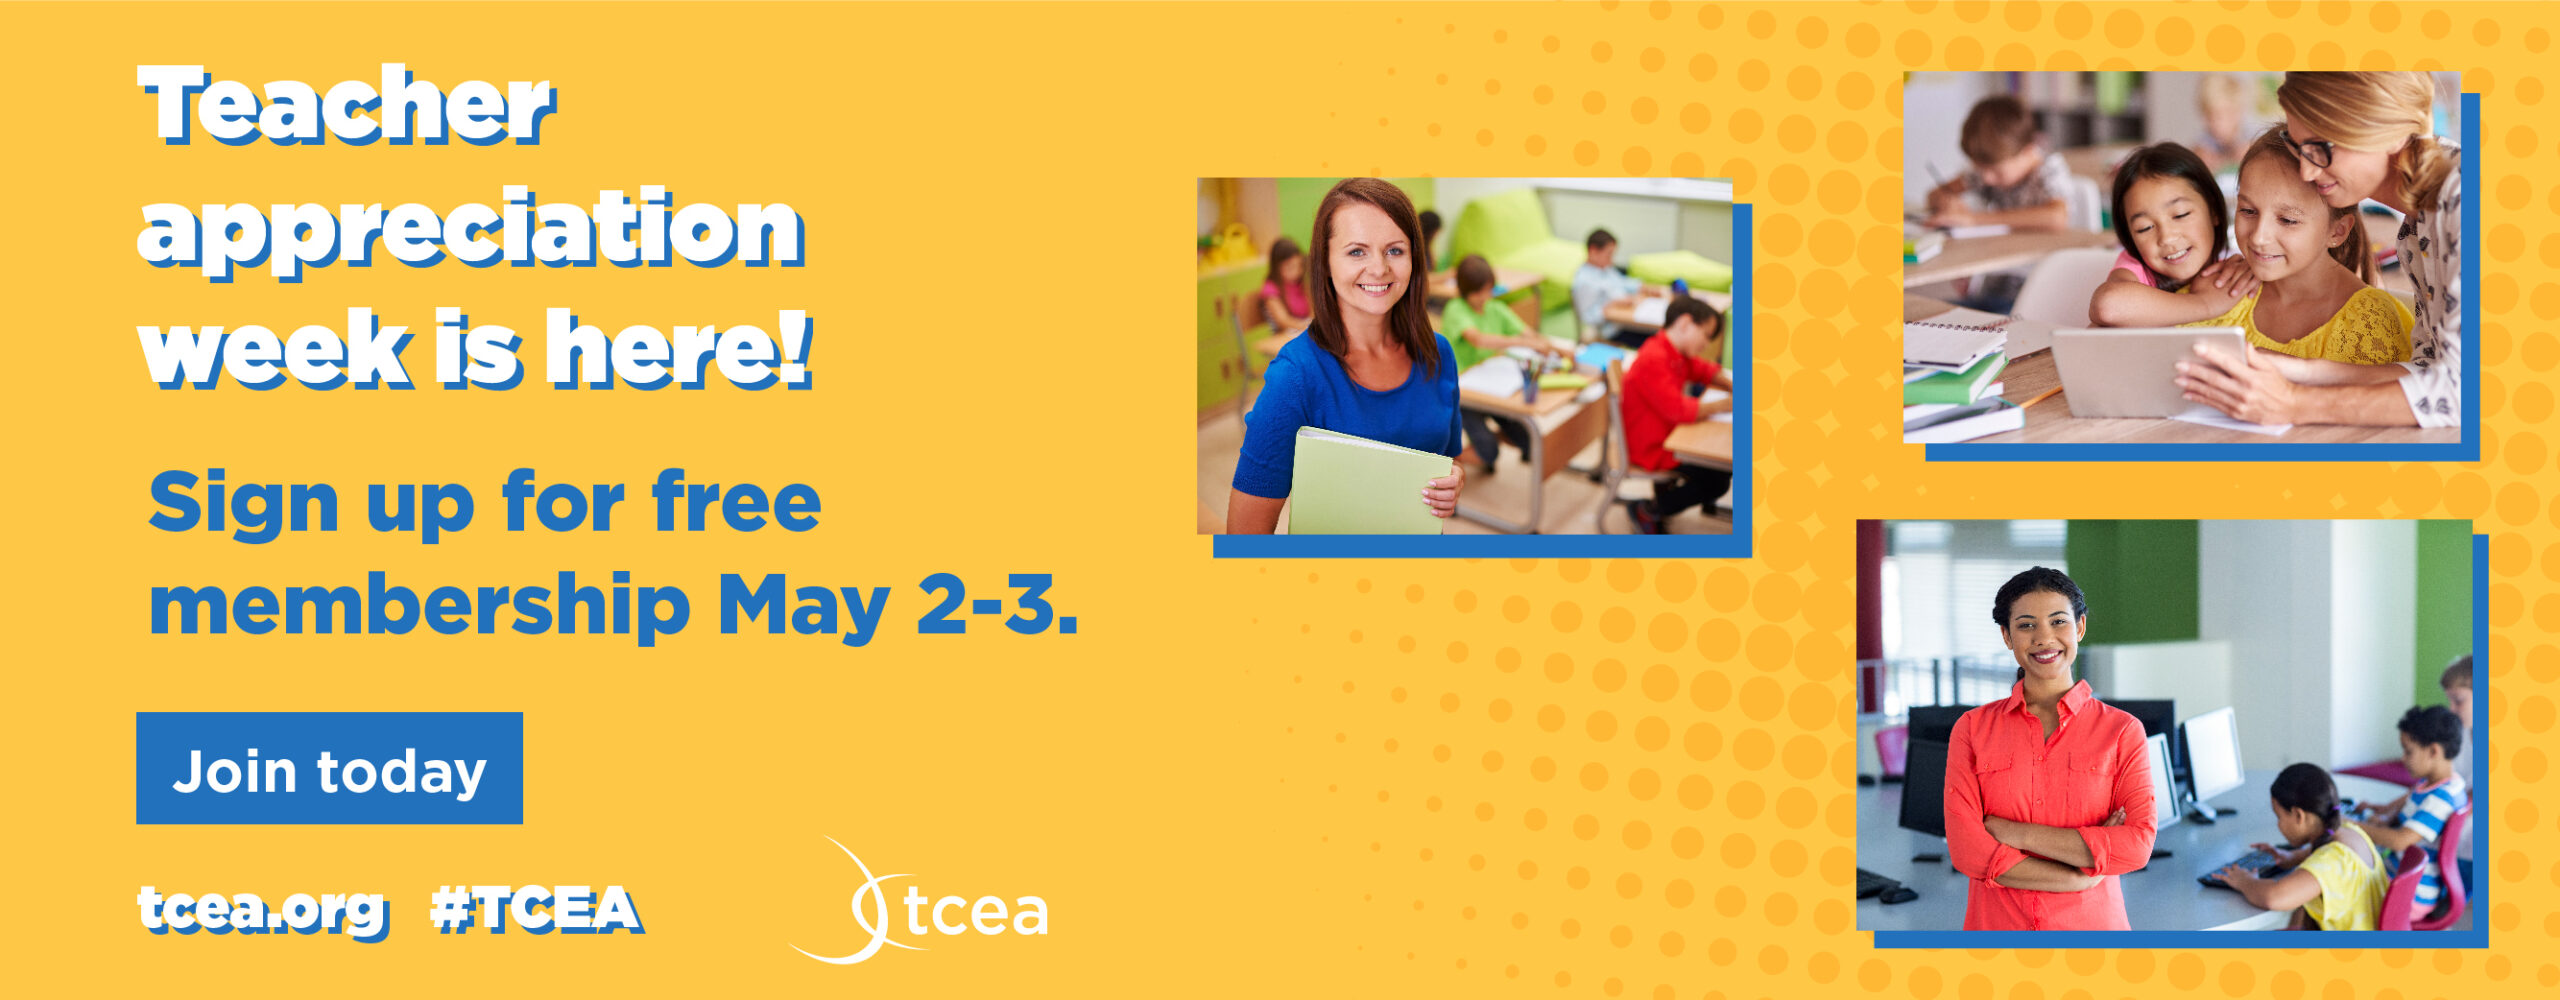 Two Days Only: Tell a Friend about Free TCEA Membership! ￼ • TechNotes Blog